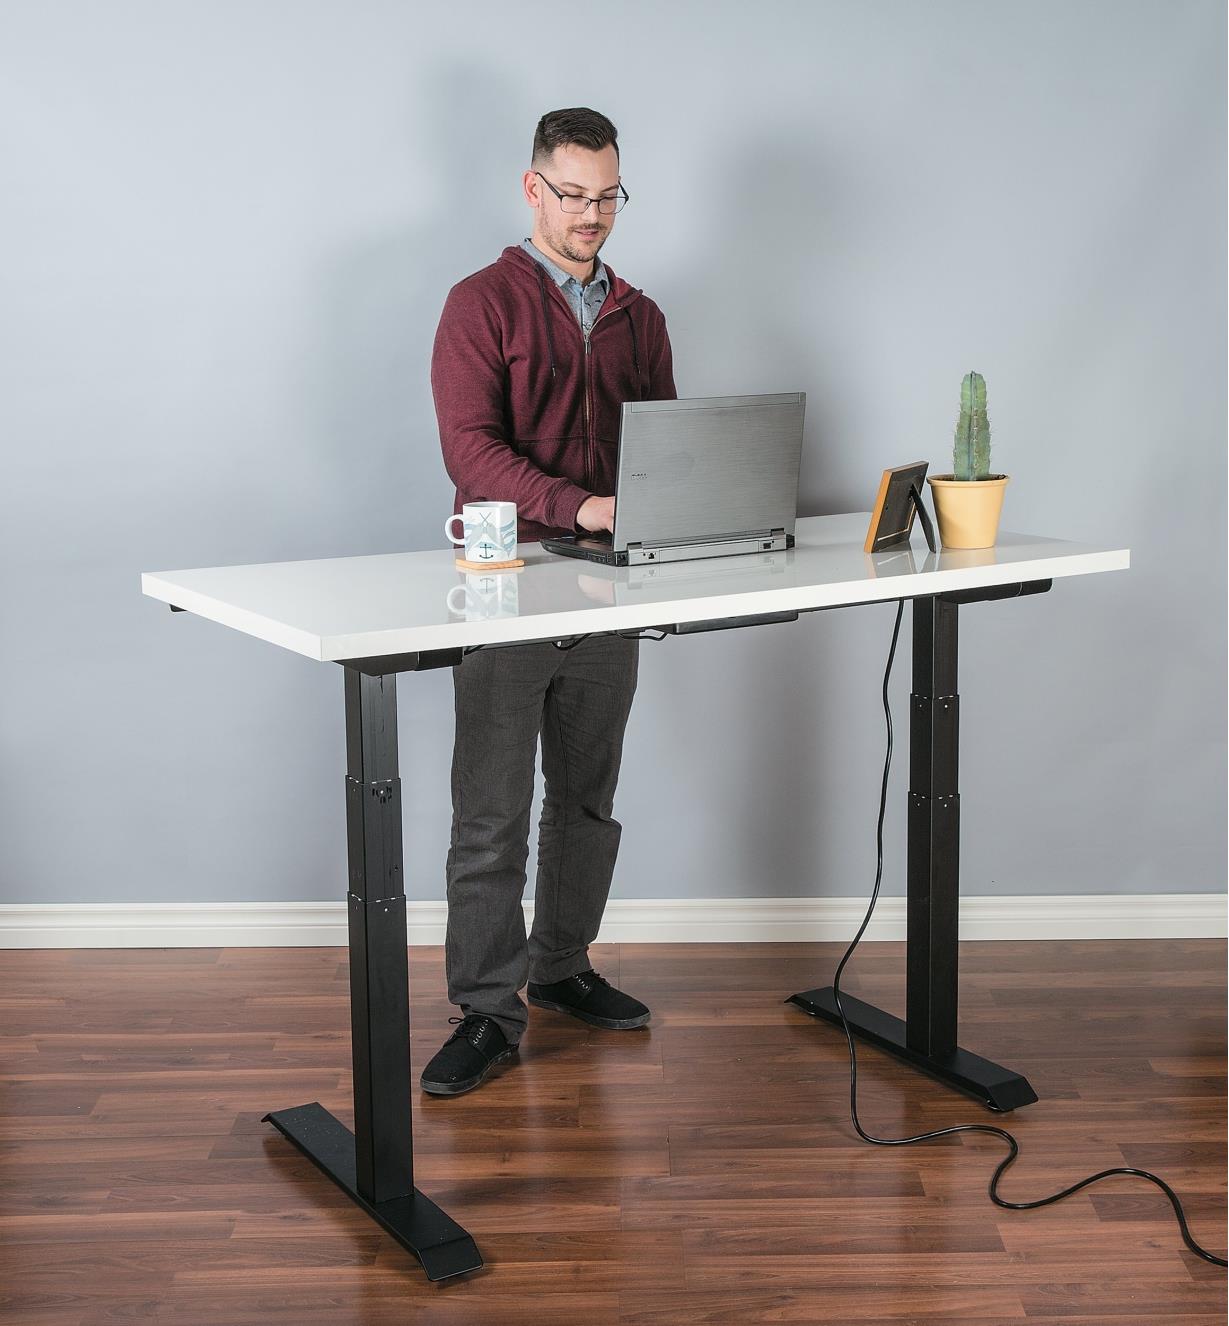 Motorized Table Lift used to support a stand-up desk in an office